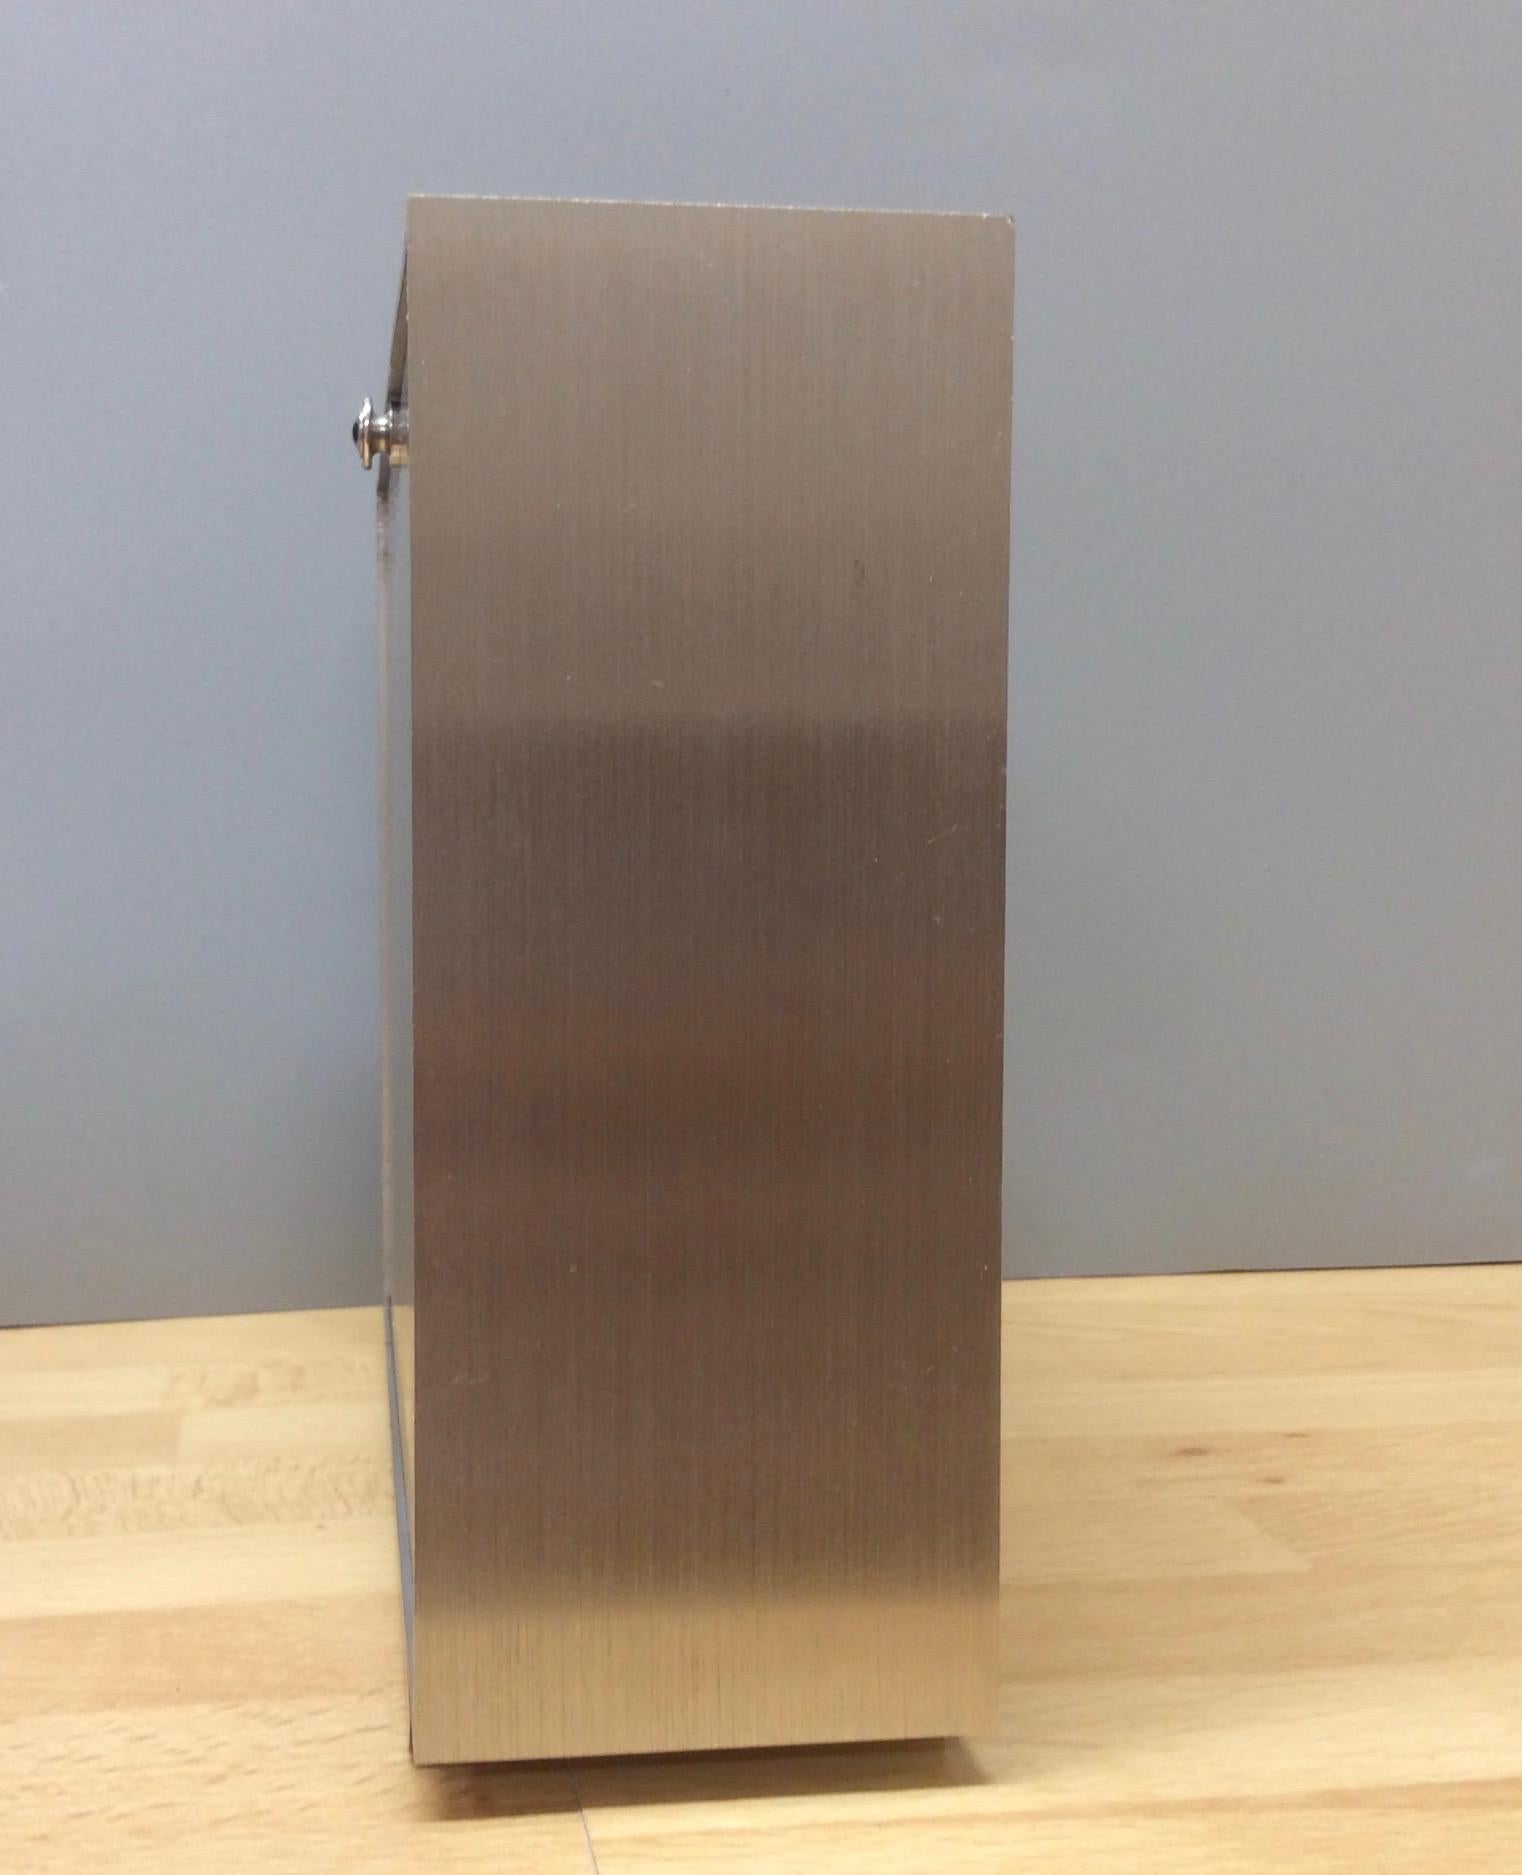 Jaeger-LeCoultre Brushed Steel Weather Station In Good Condition For Sale In Norwich, GB